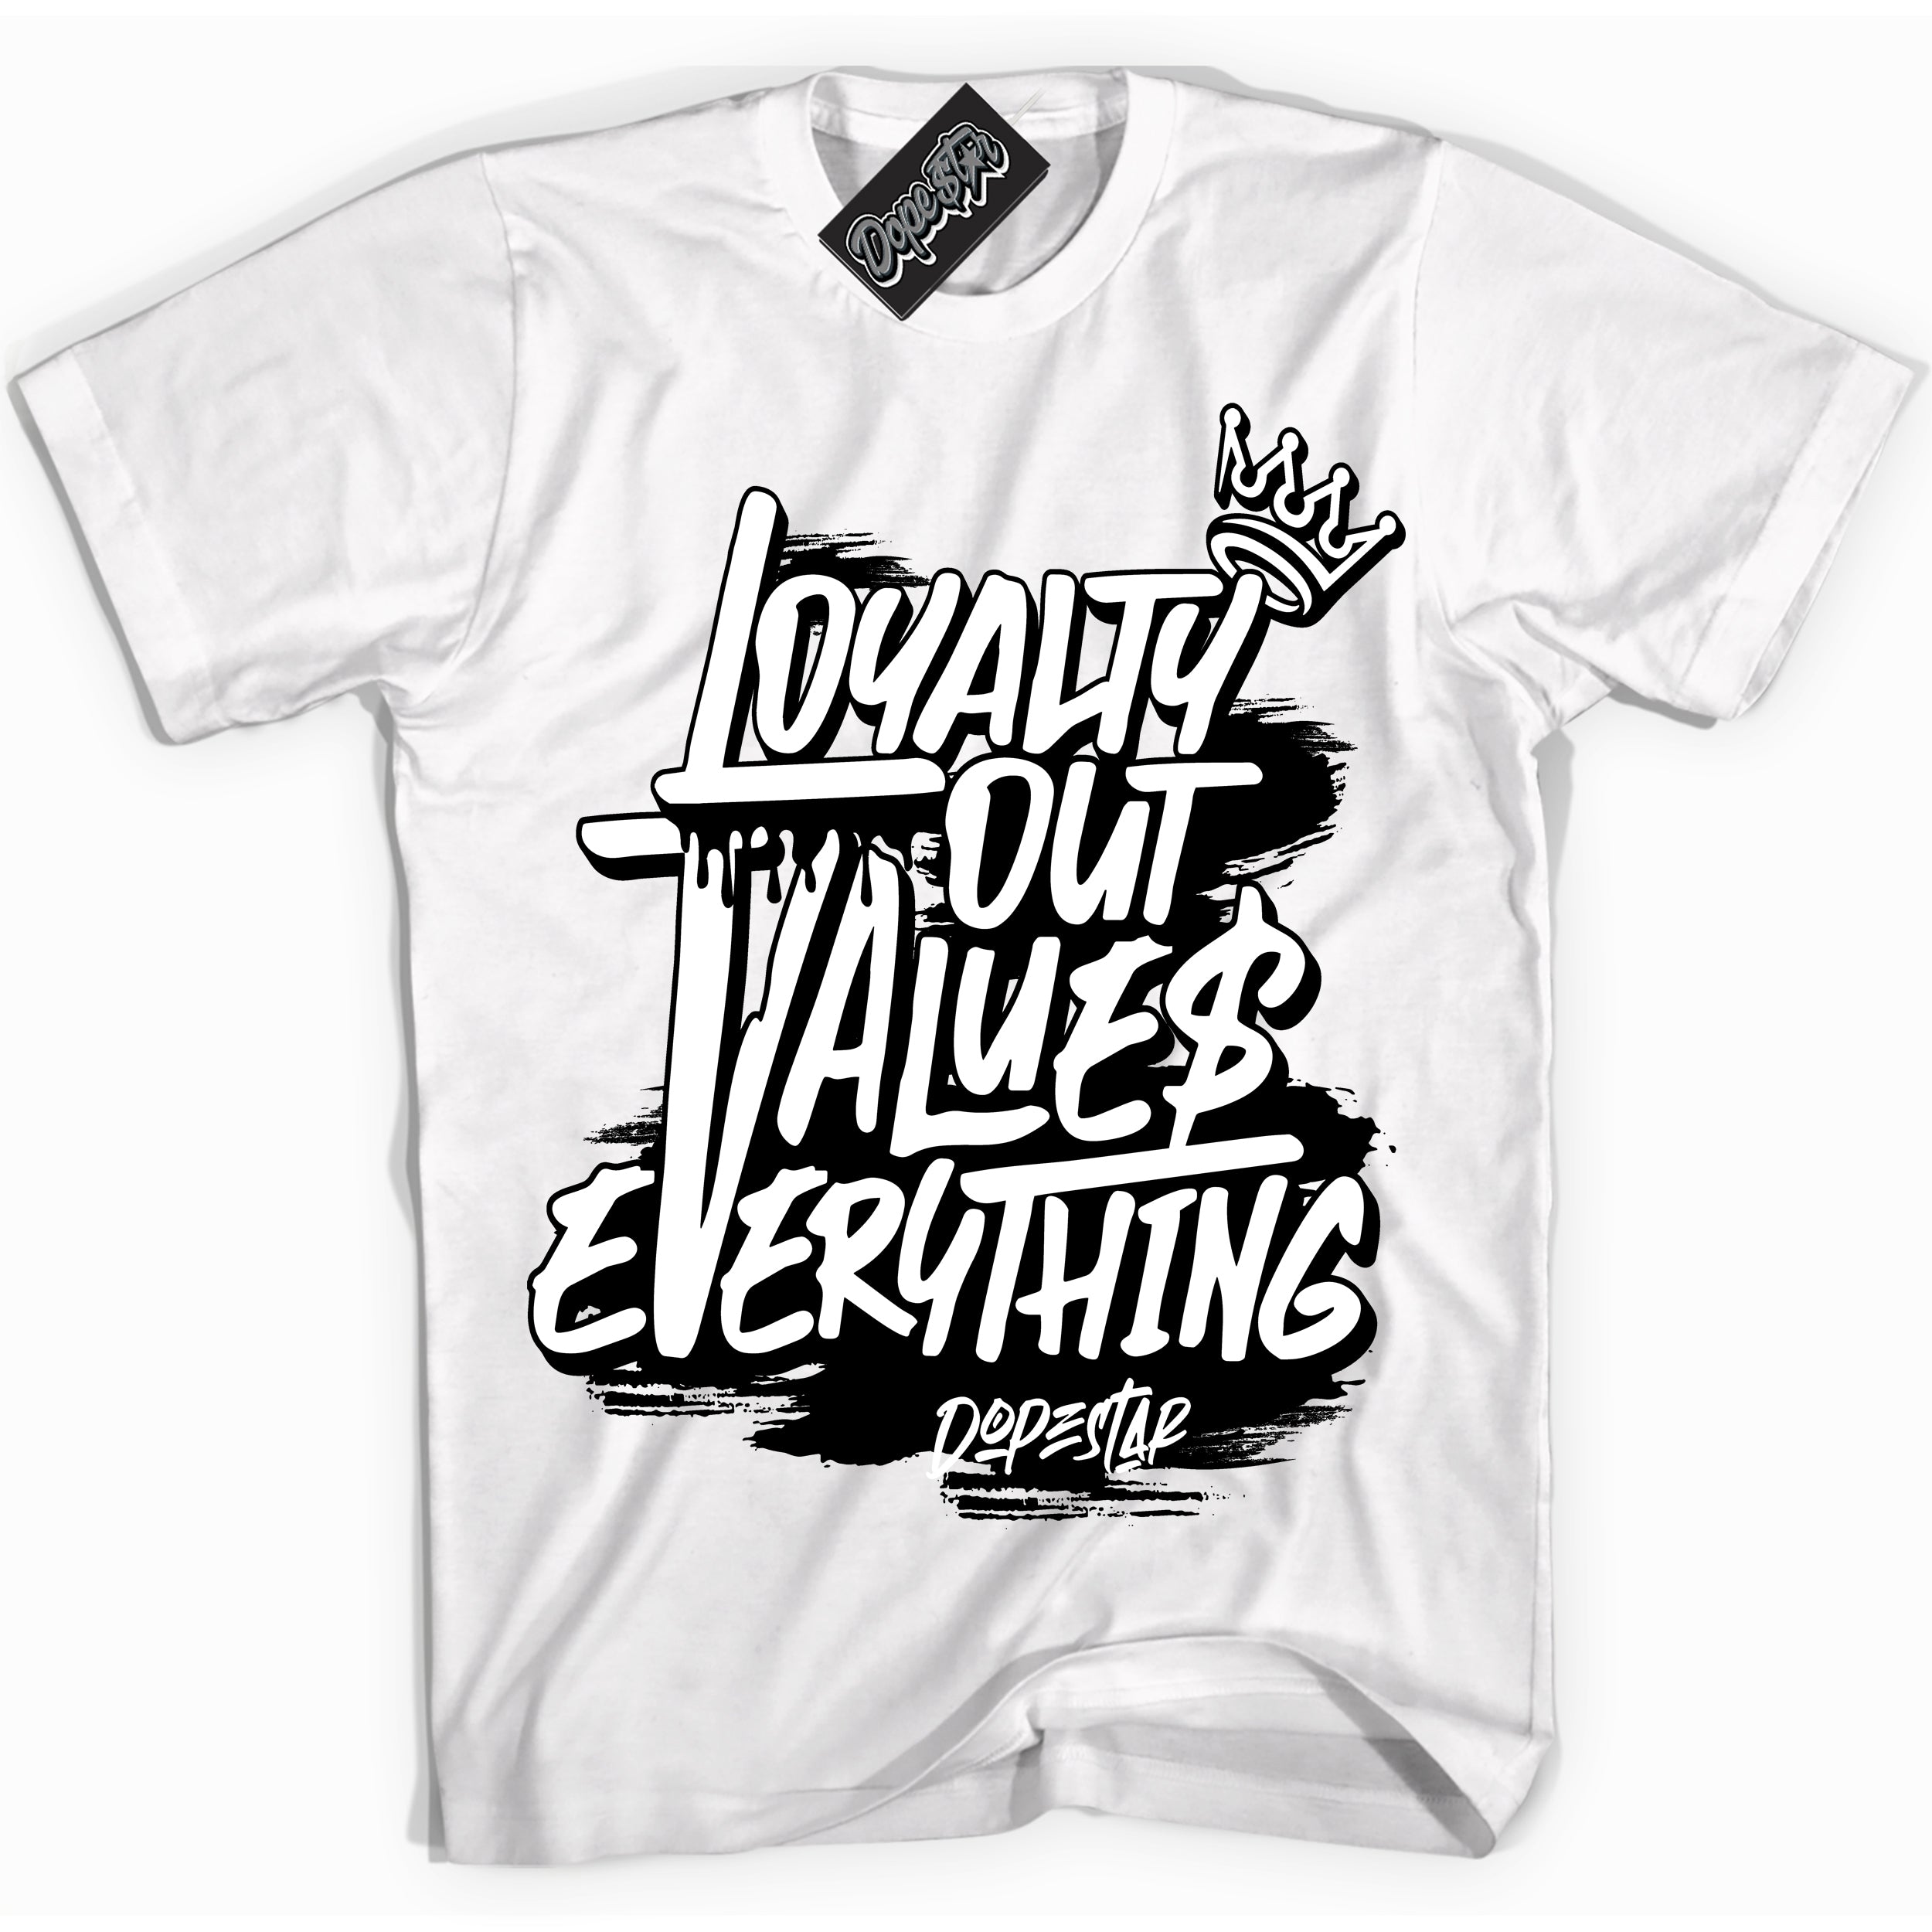 Cool White Shirt with “ Loyalty Out Values Everything” design that perfectly matches SP Travis Scott Black Phantom 1s Sneakers.